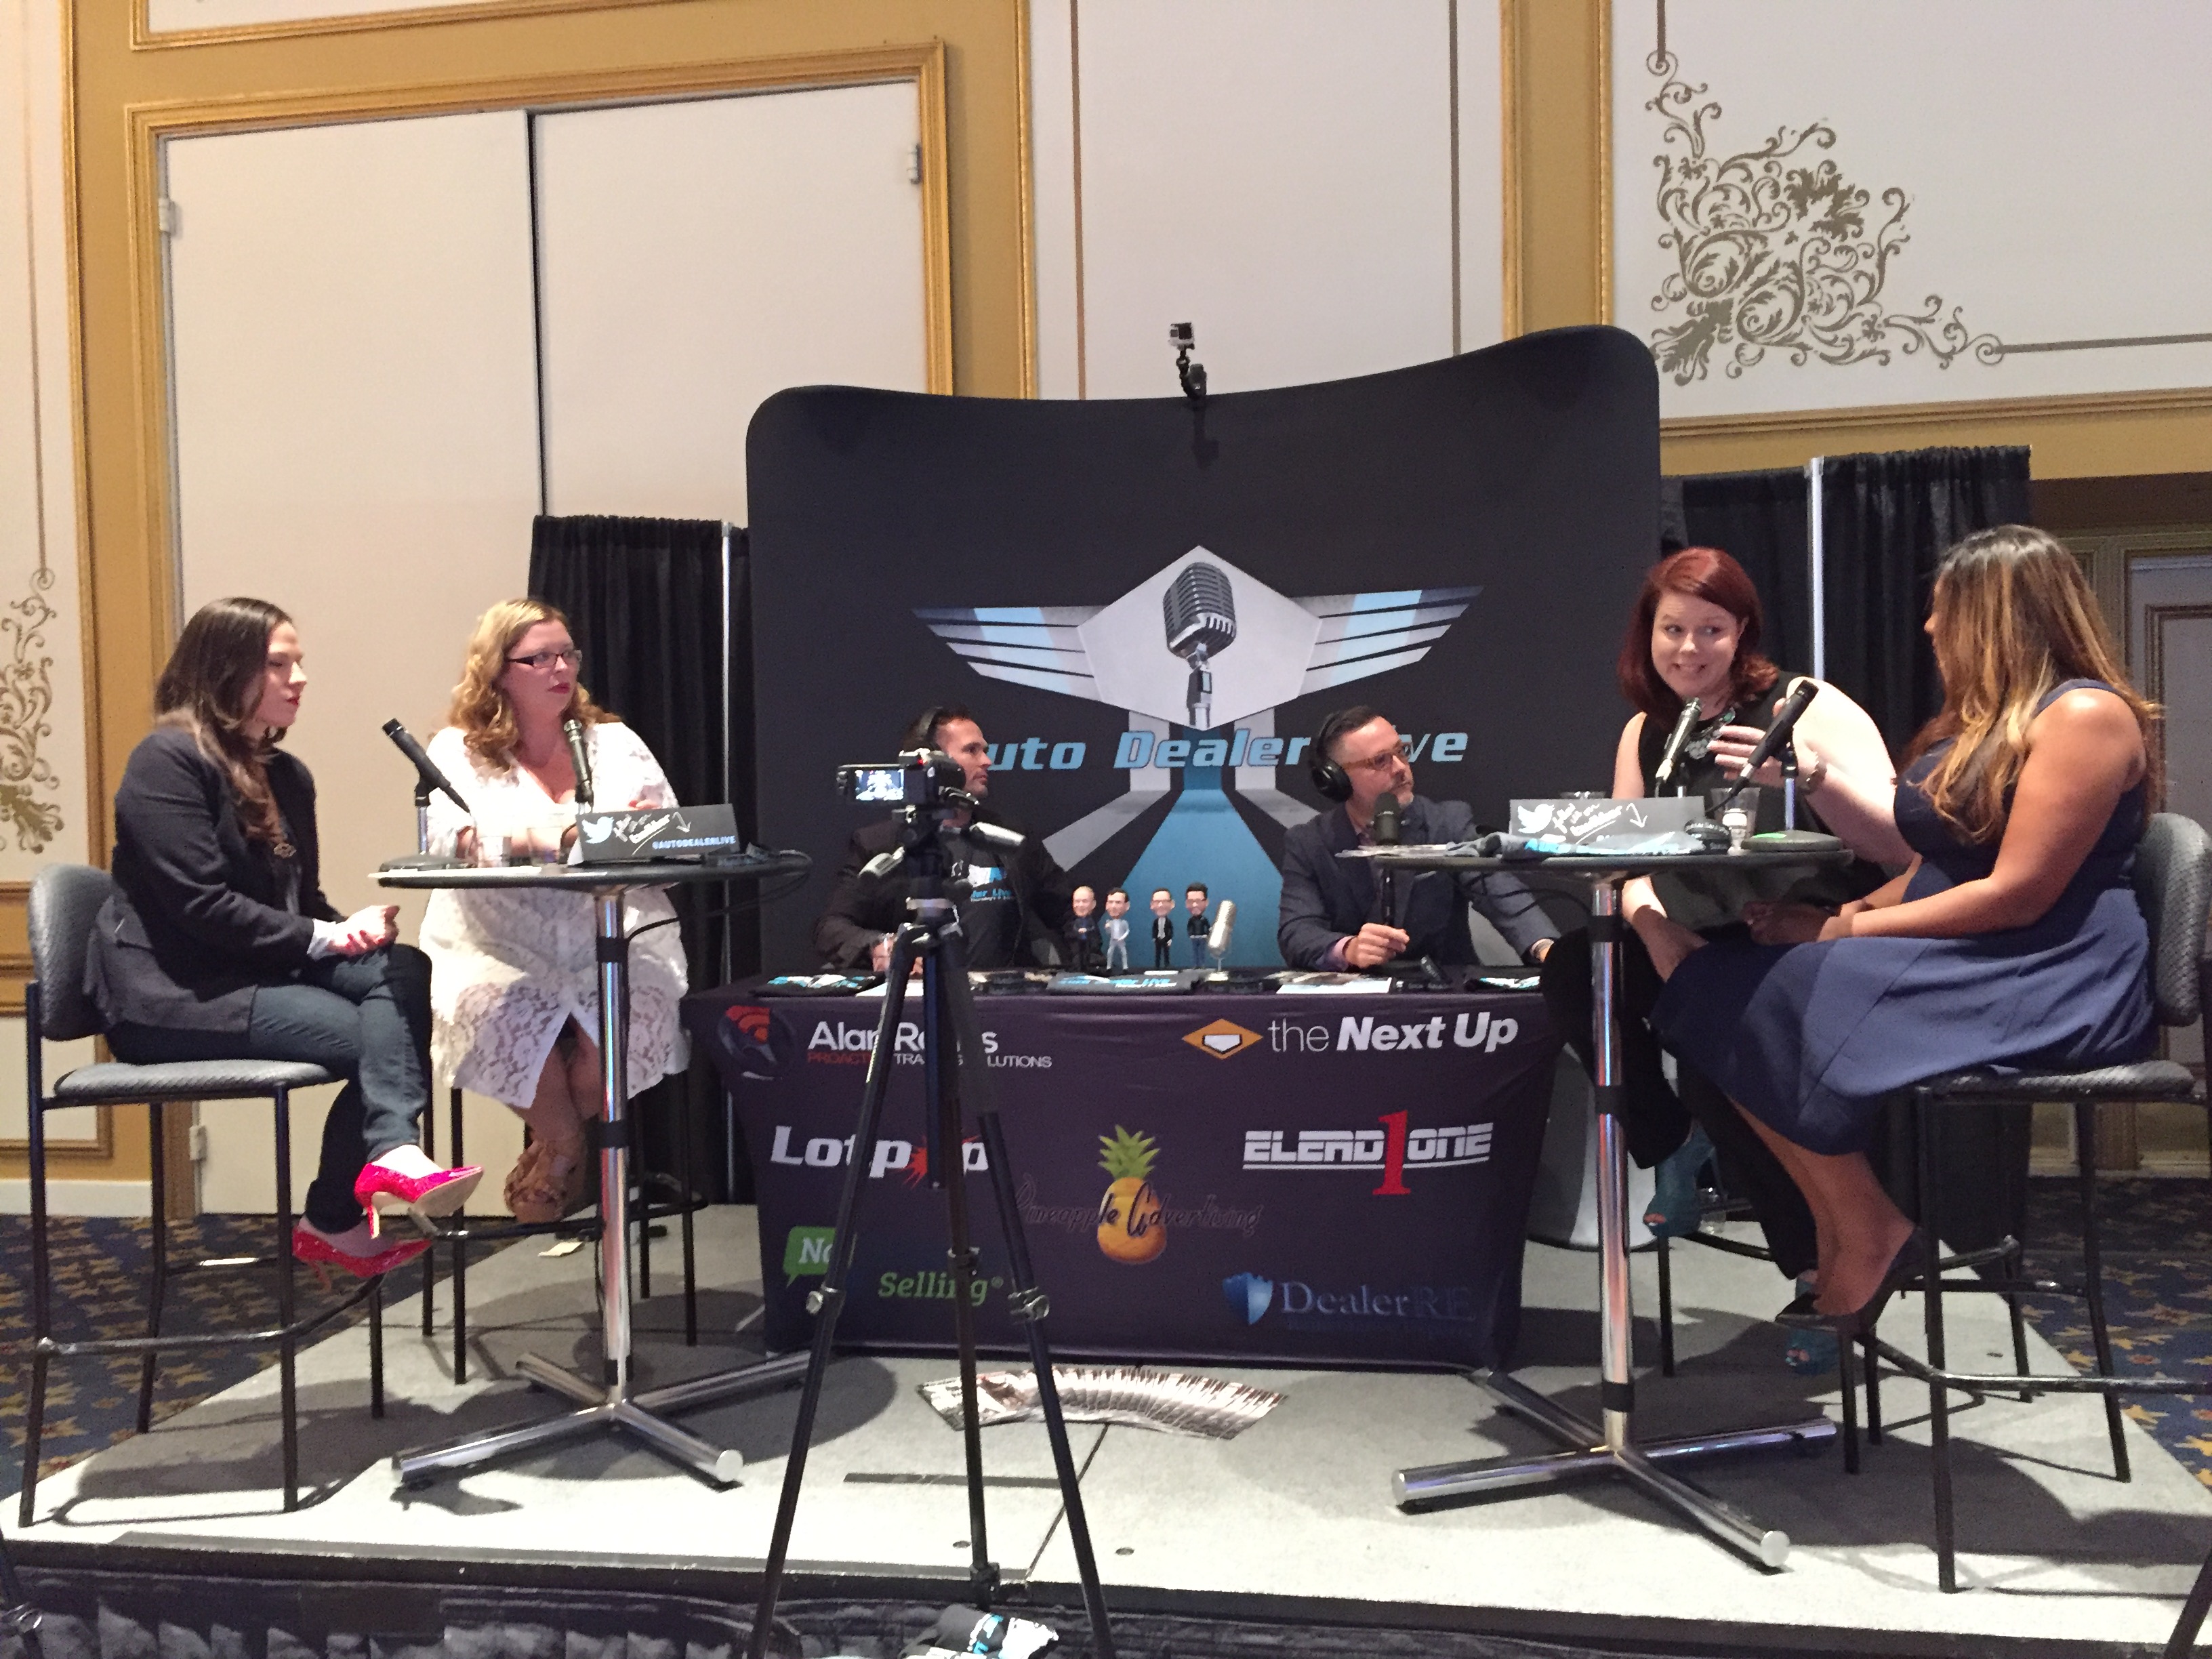 The Women Who Rock Auto during AutoDealer Live, including Jennifer Briggs